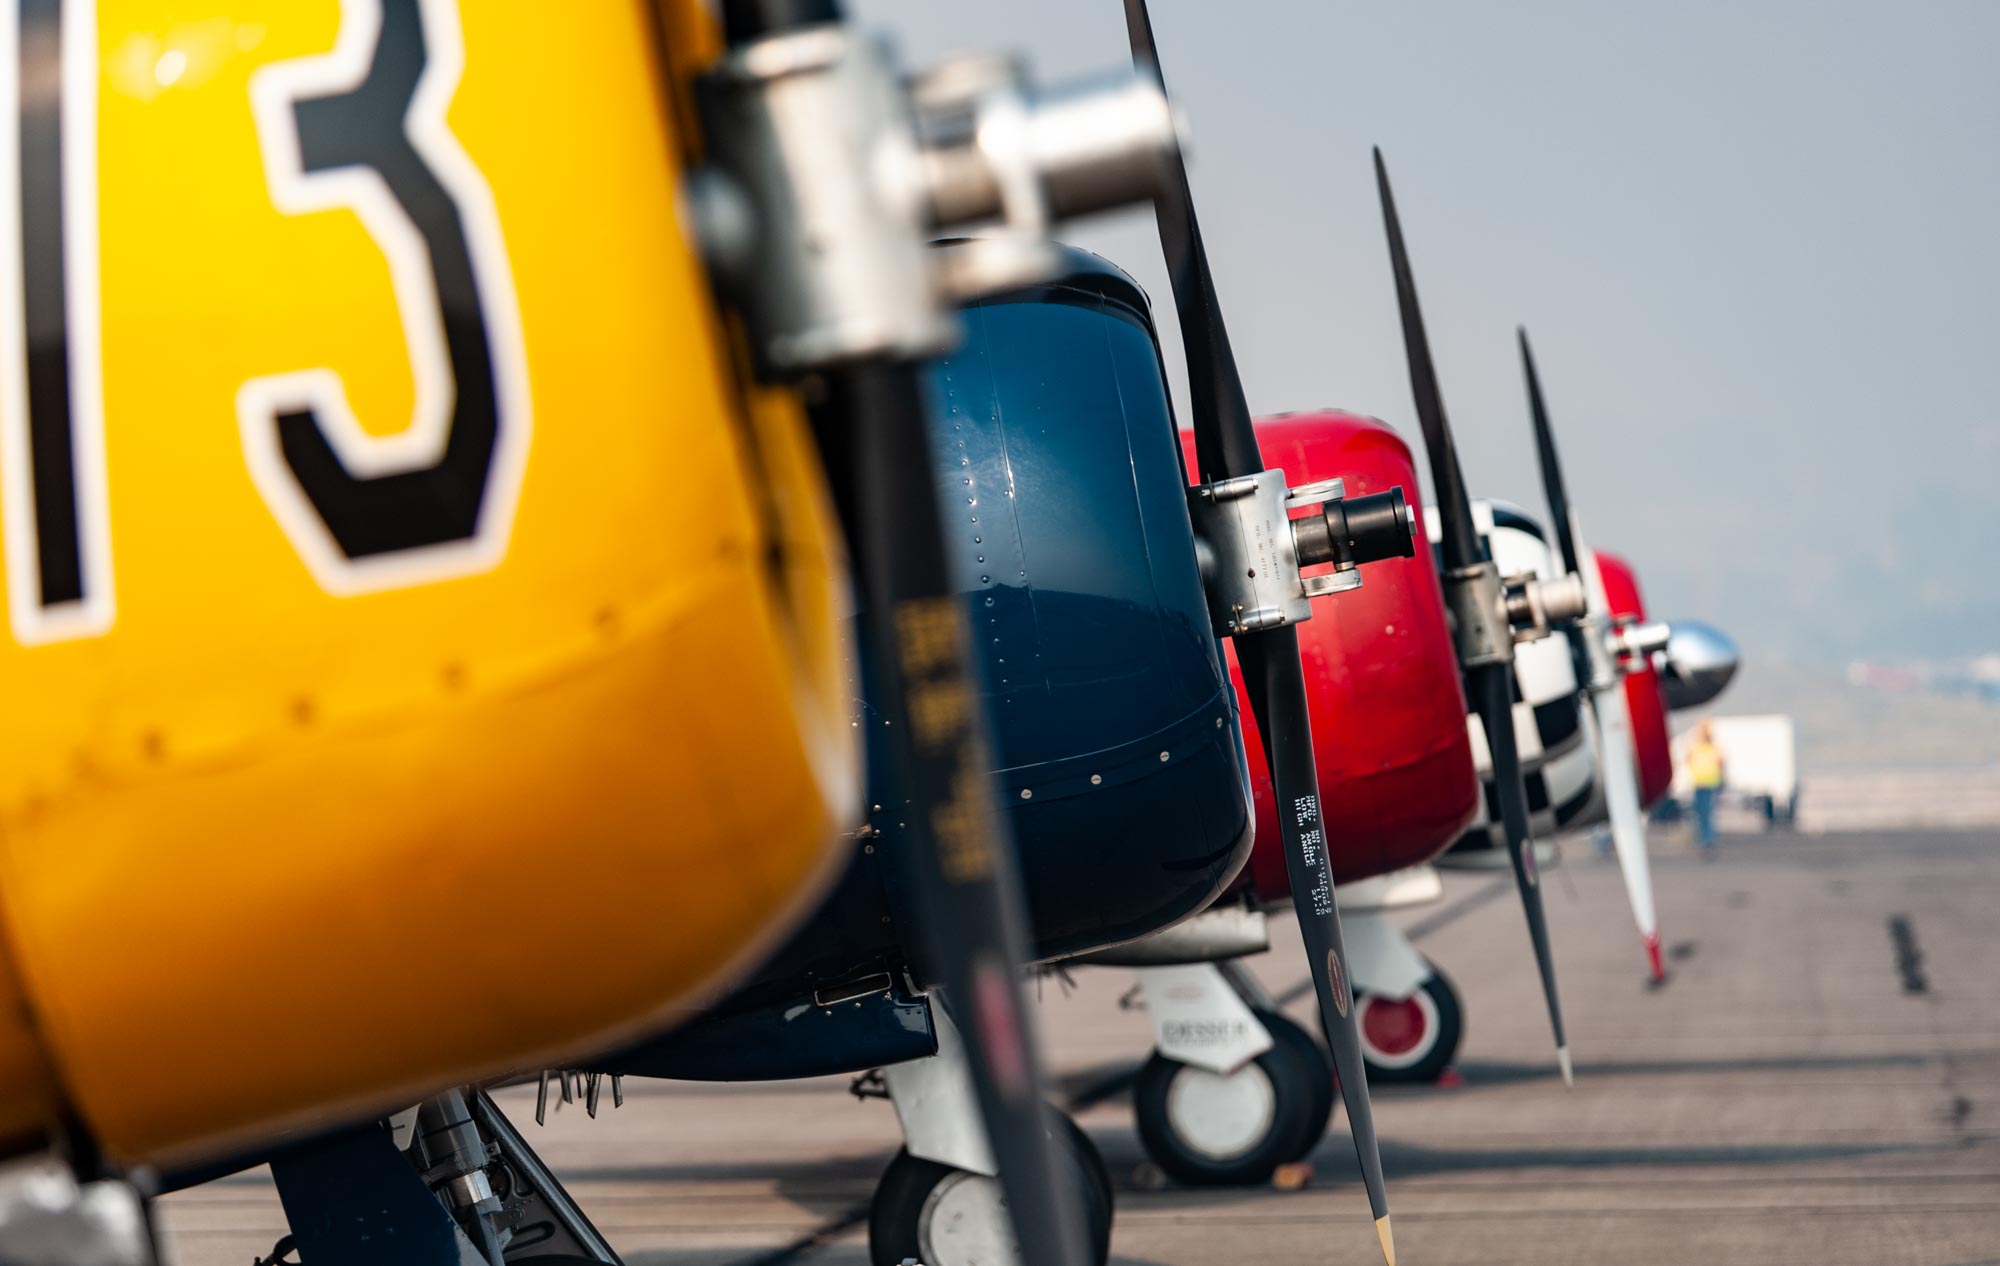 A line-up of parked airplanes